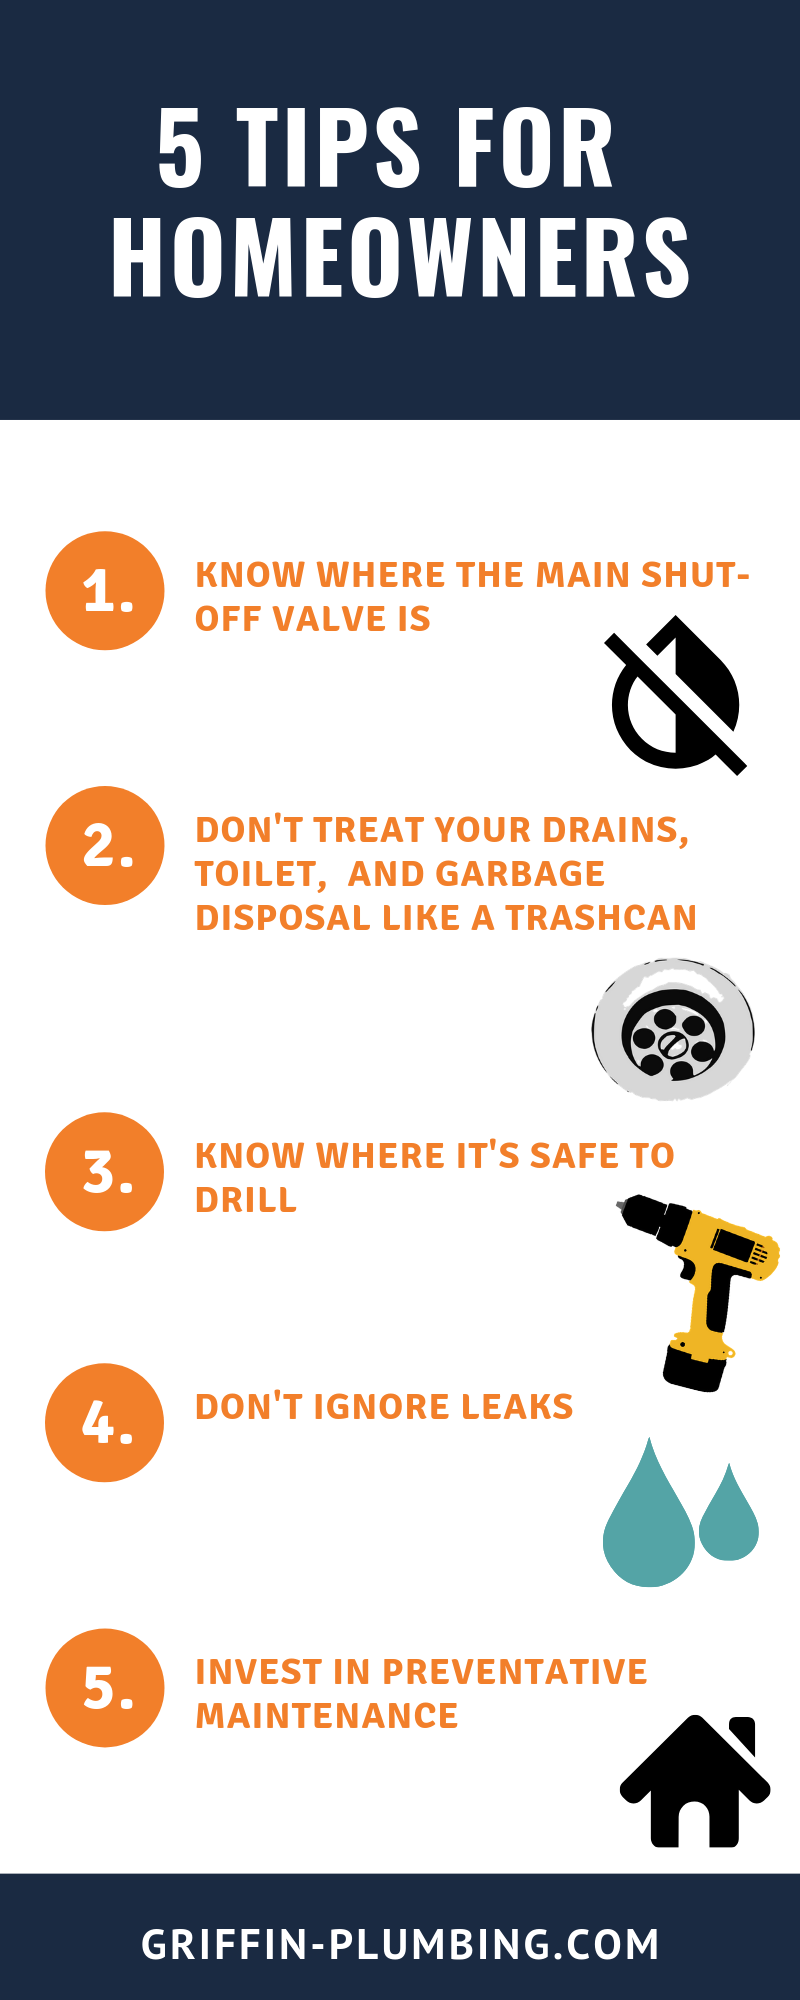 Top Plumbing Tips You Need To Know